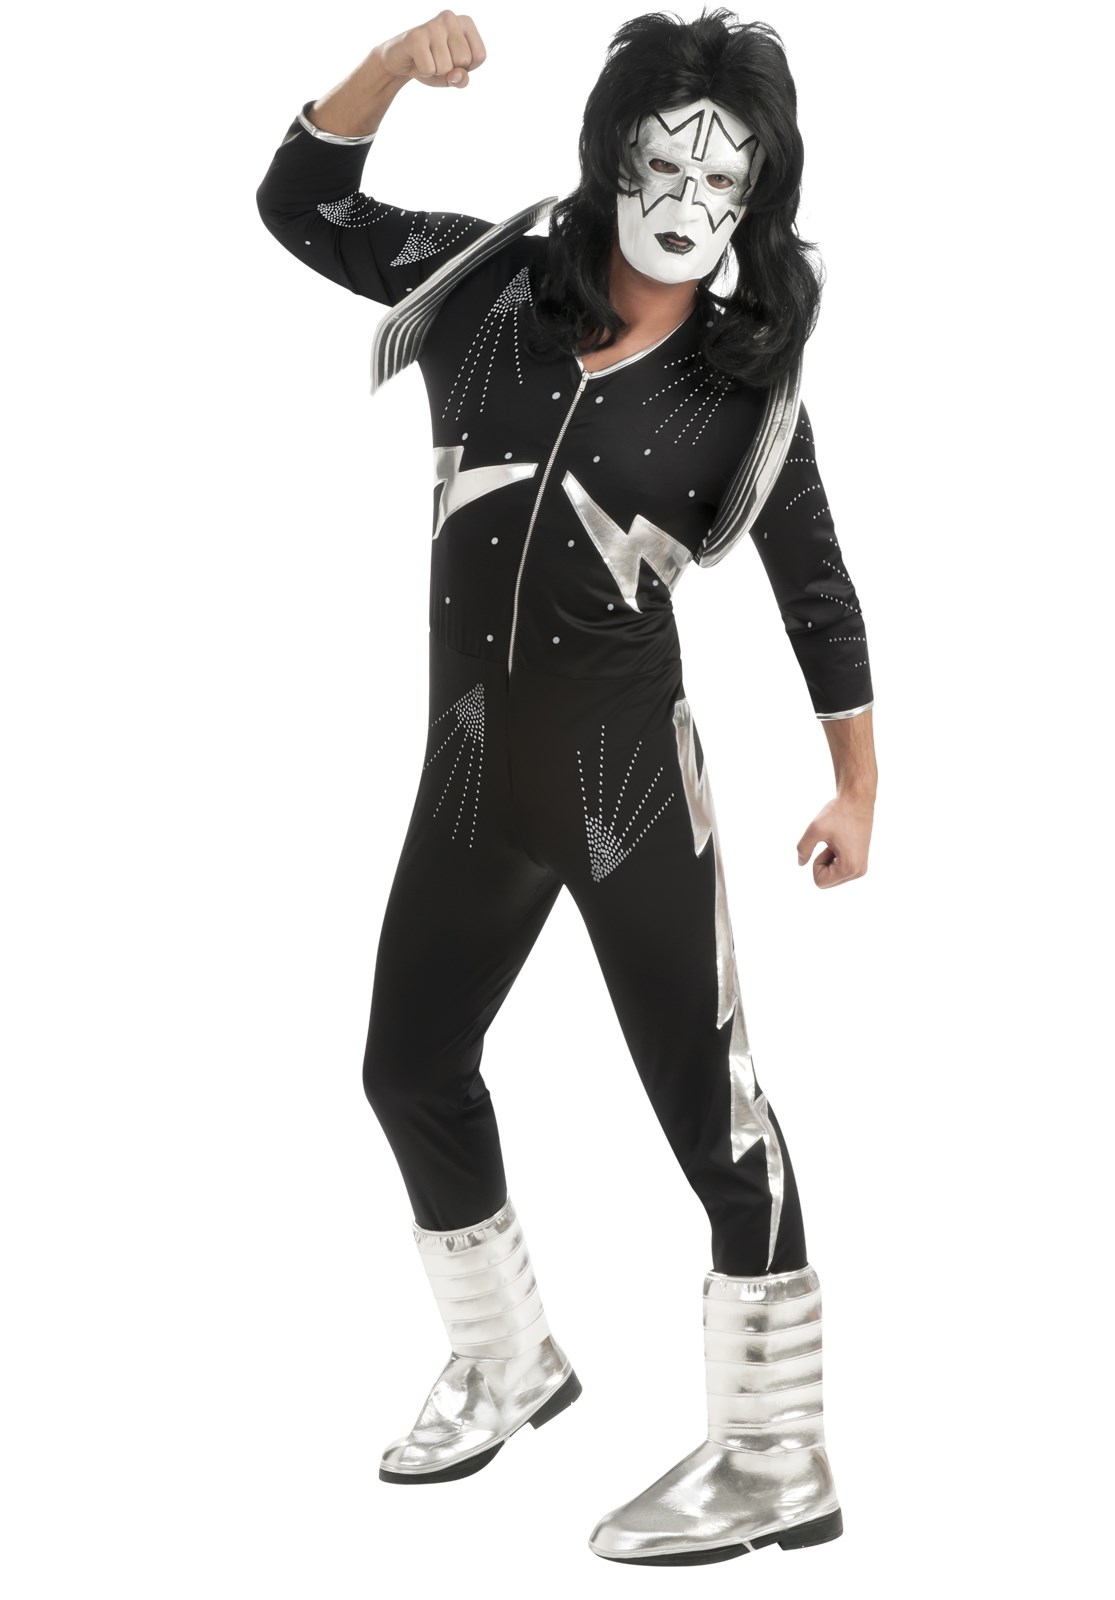 KISS – Spaceman Adult Costume